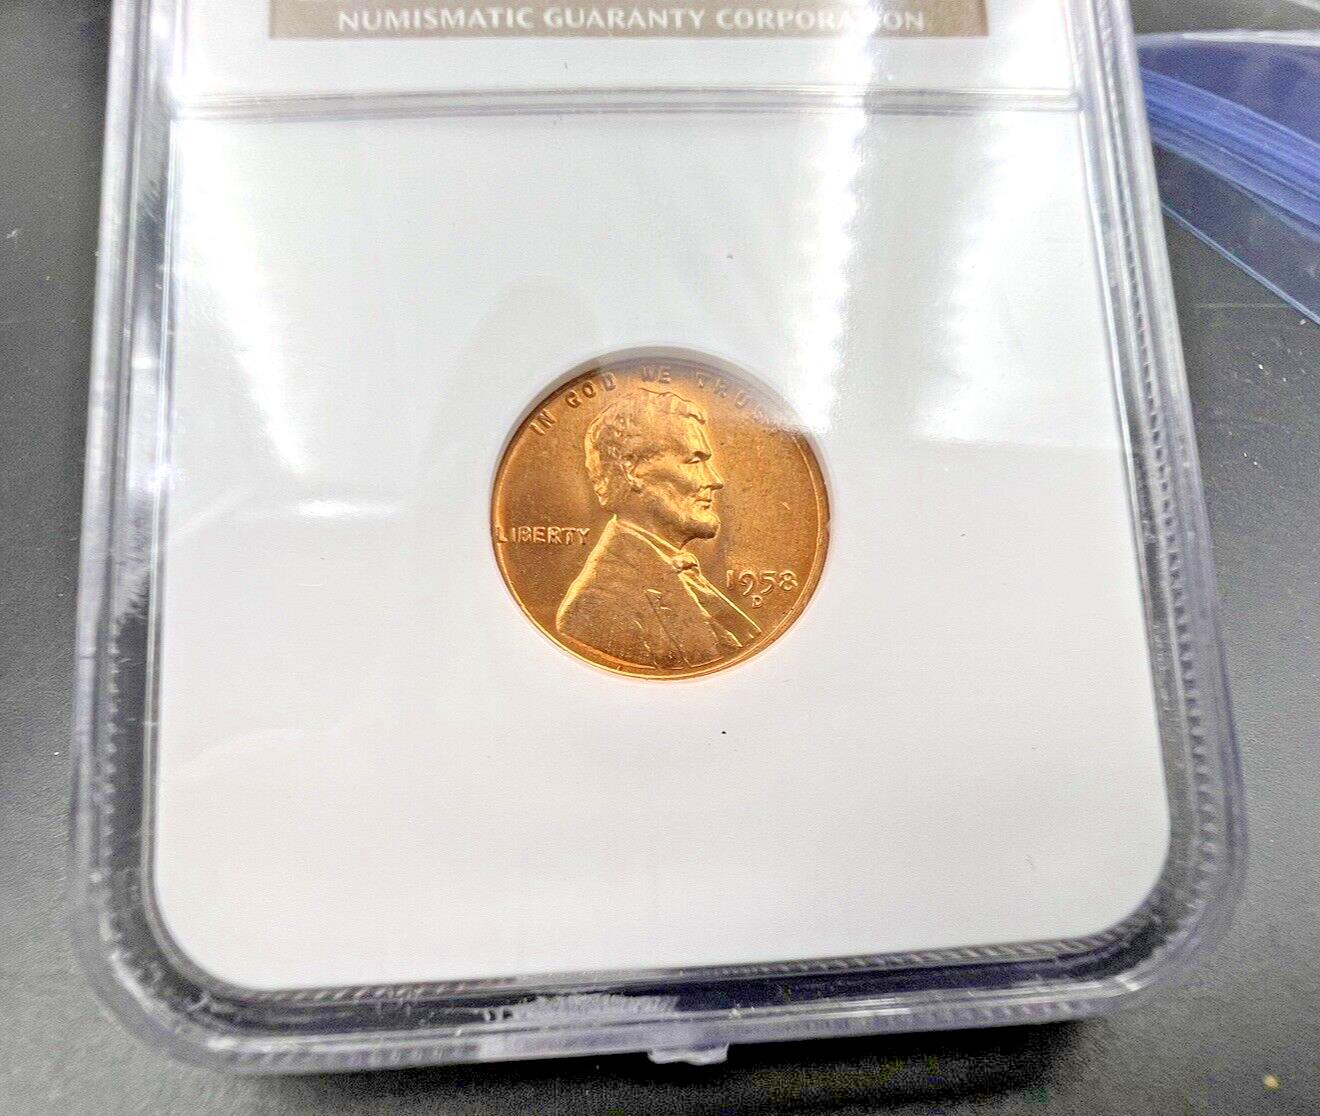 1958 D Lincoln Wheat Cent Penny Coin NGC MS66 RD GEM BU #3